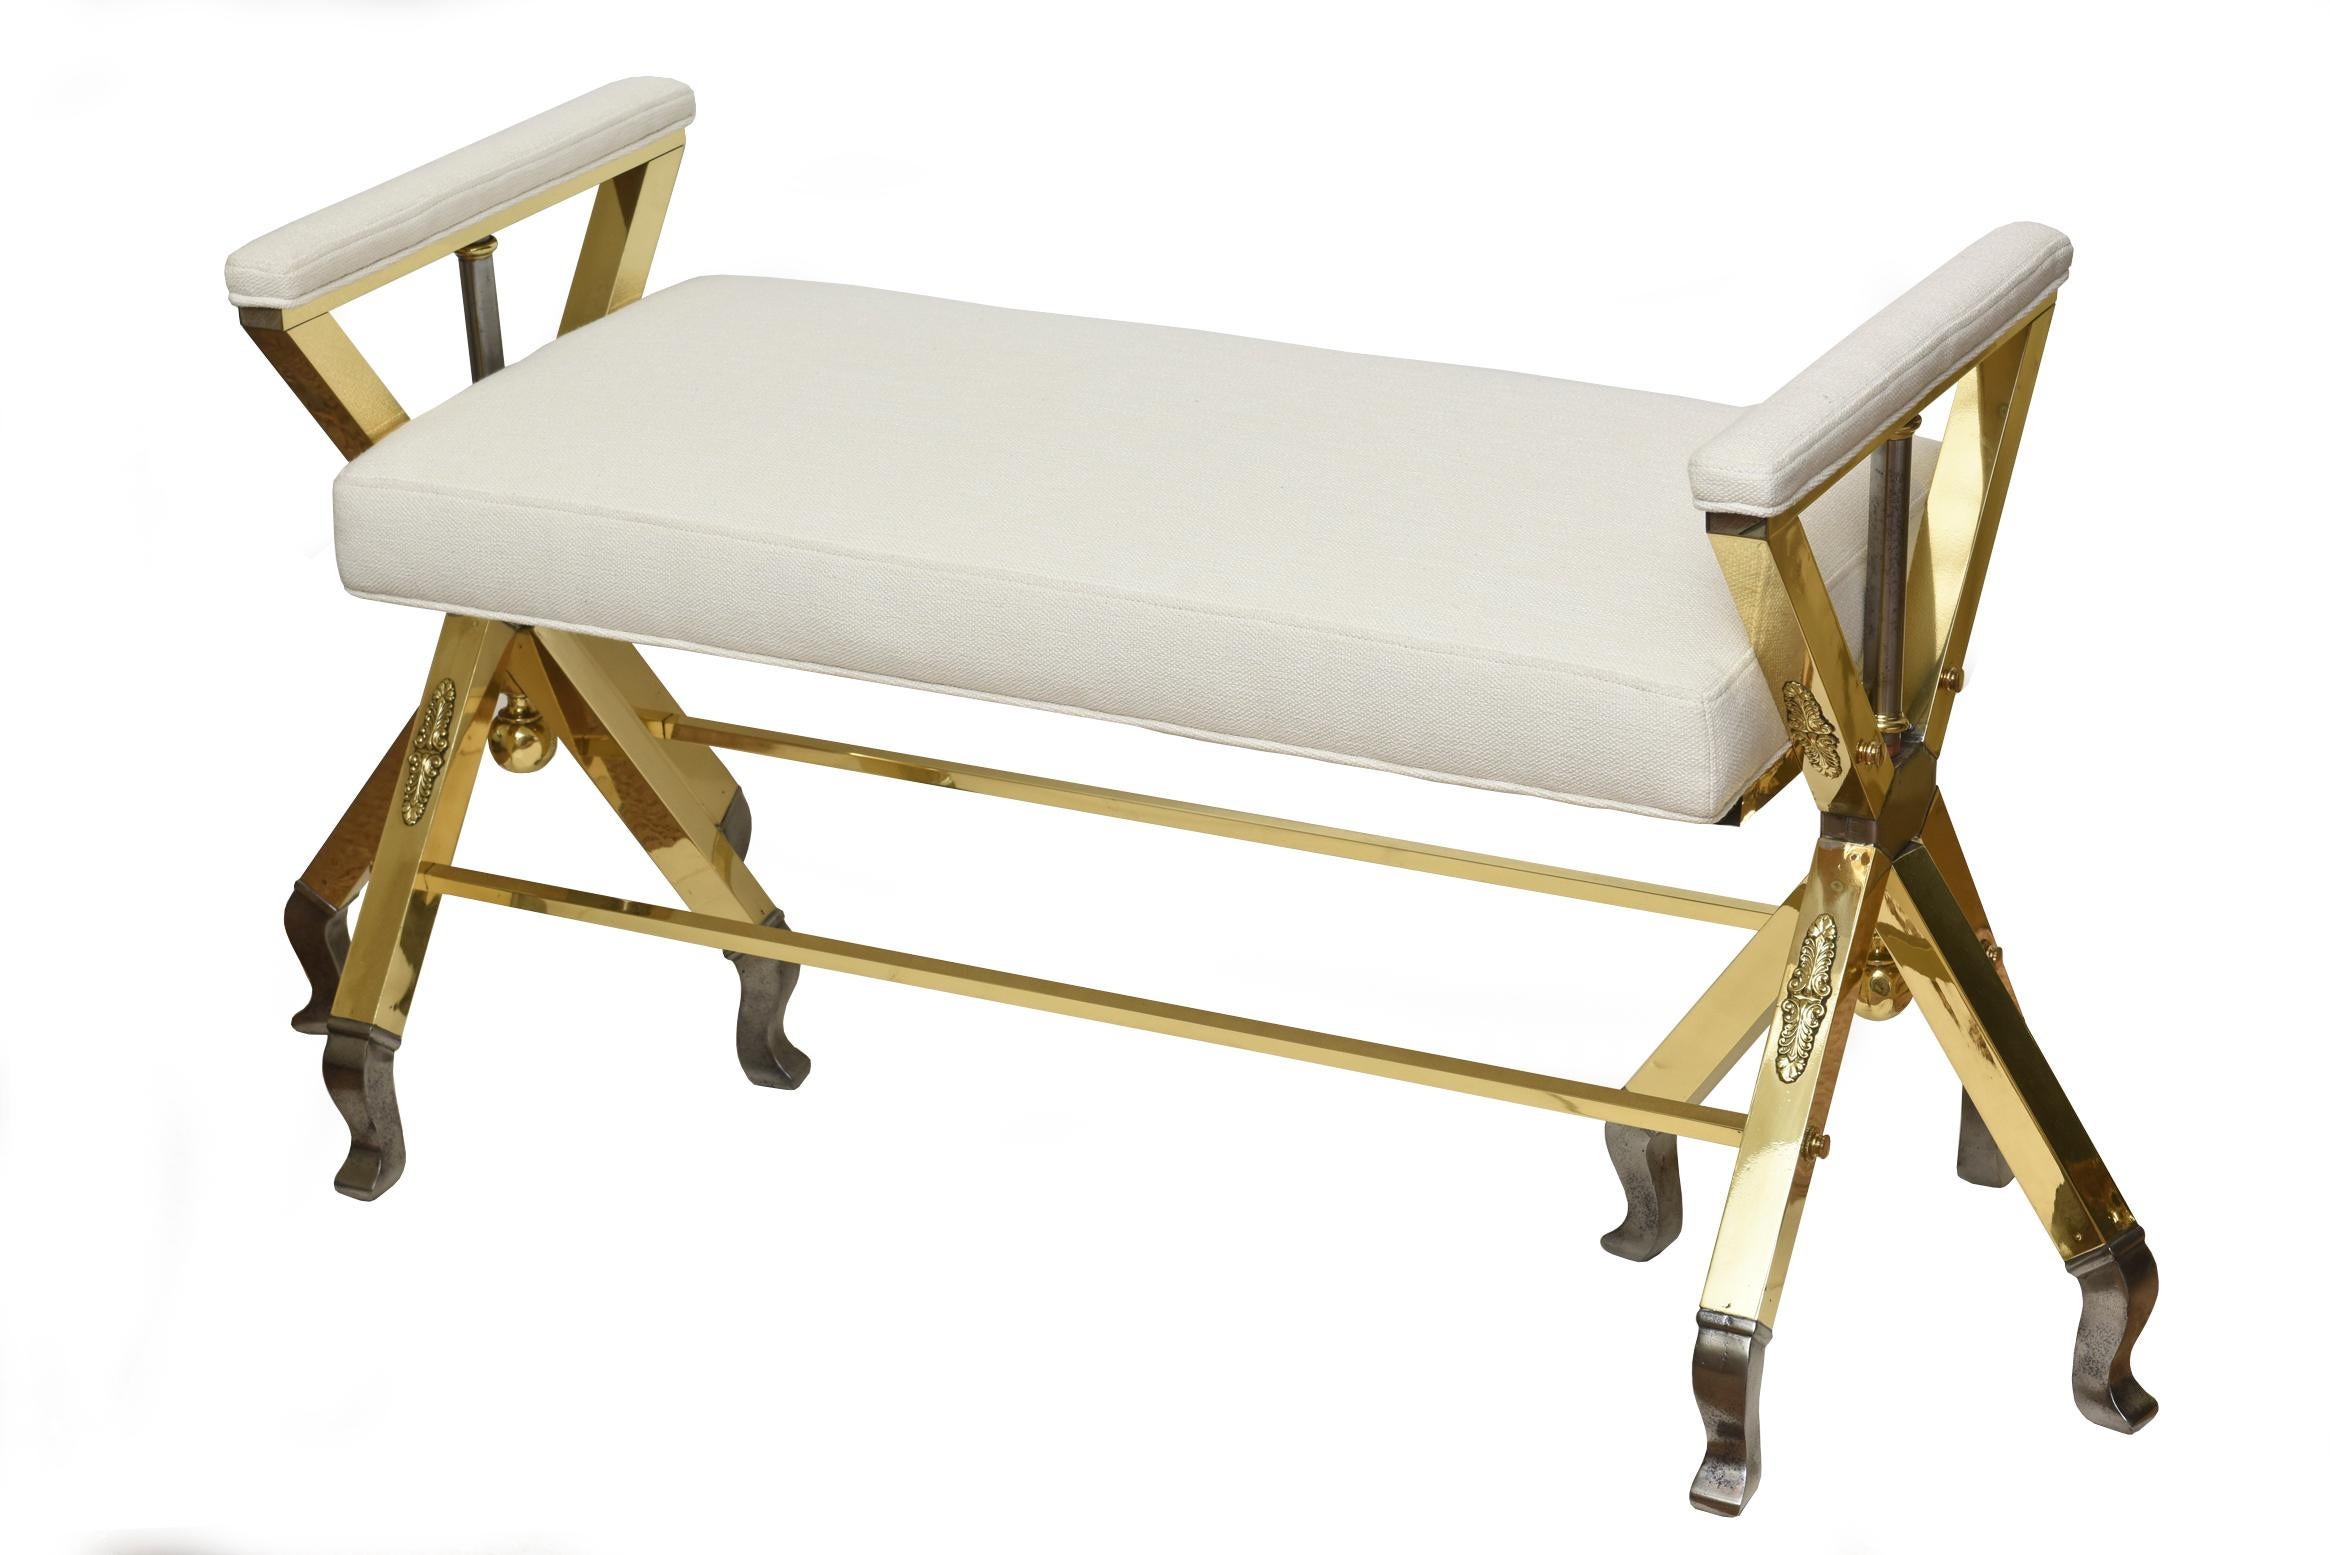 This most unusual and interesting fully restored Mid-Century Modern comfortable 3-legged bench is a combination of polished brass and steel with side arms that are upholstered. The legs can swivel and move around but this is the sturdy composition